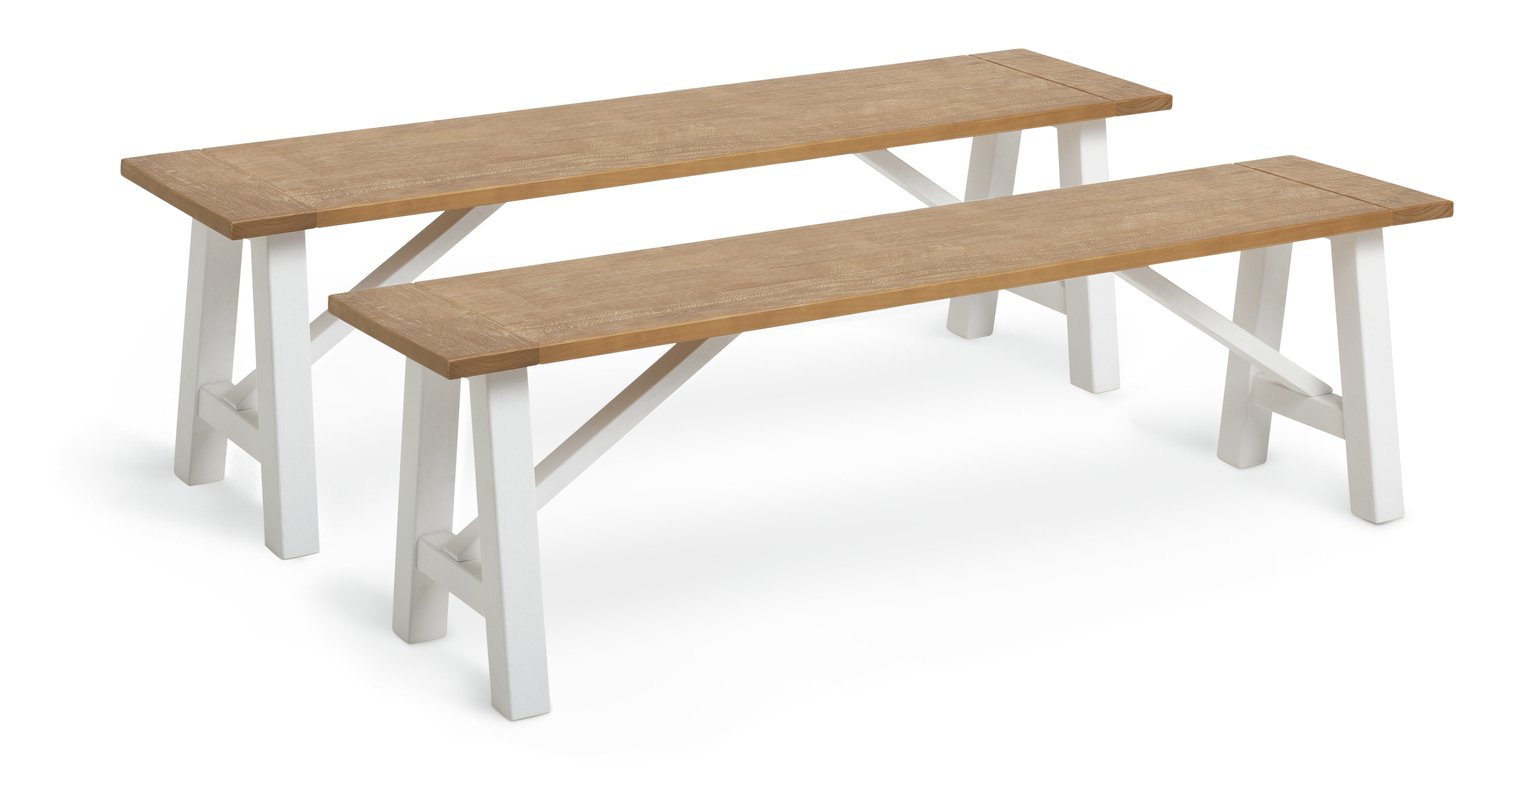 Habitat Burford Pair of Solid Wood Dining Benches - White